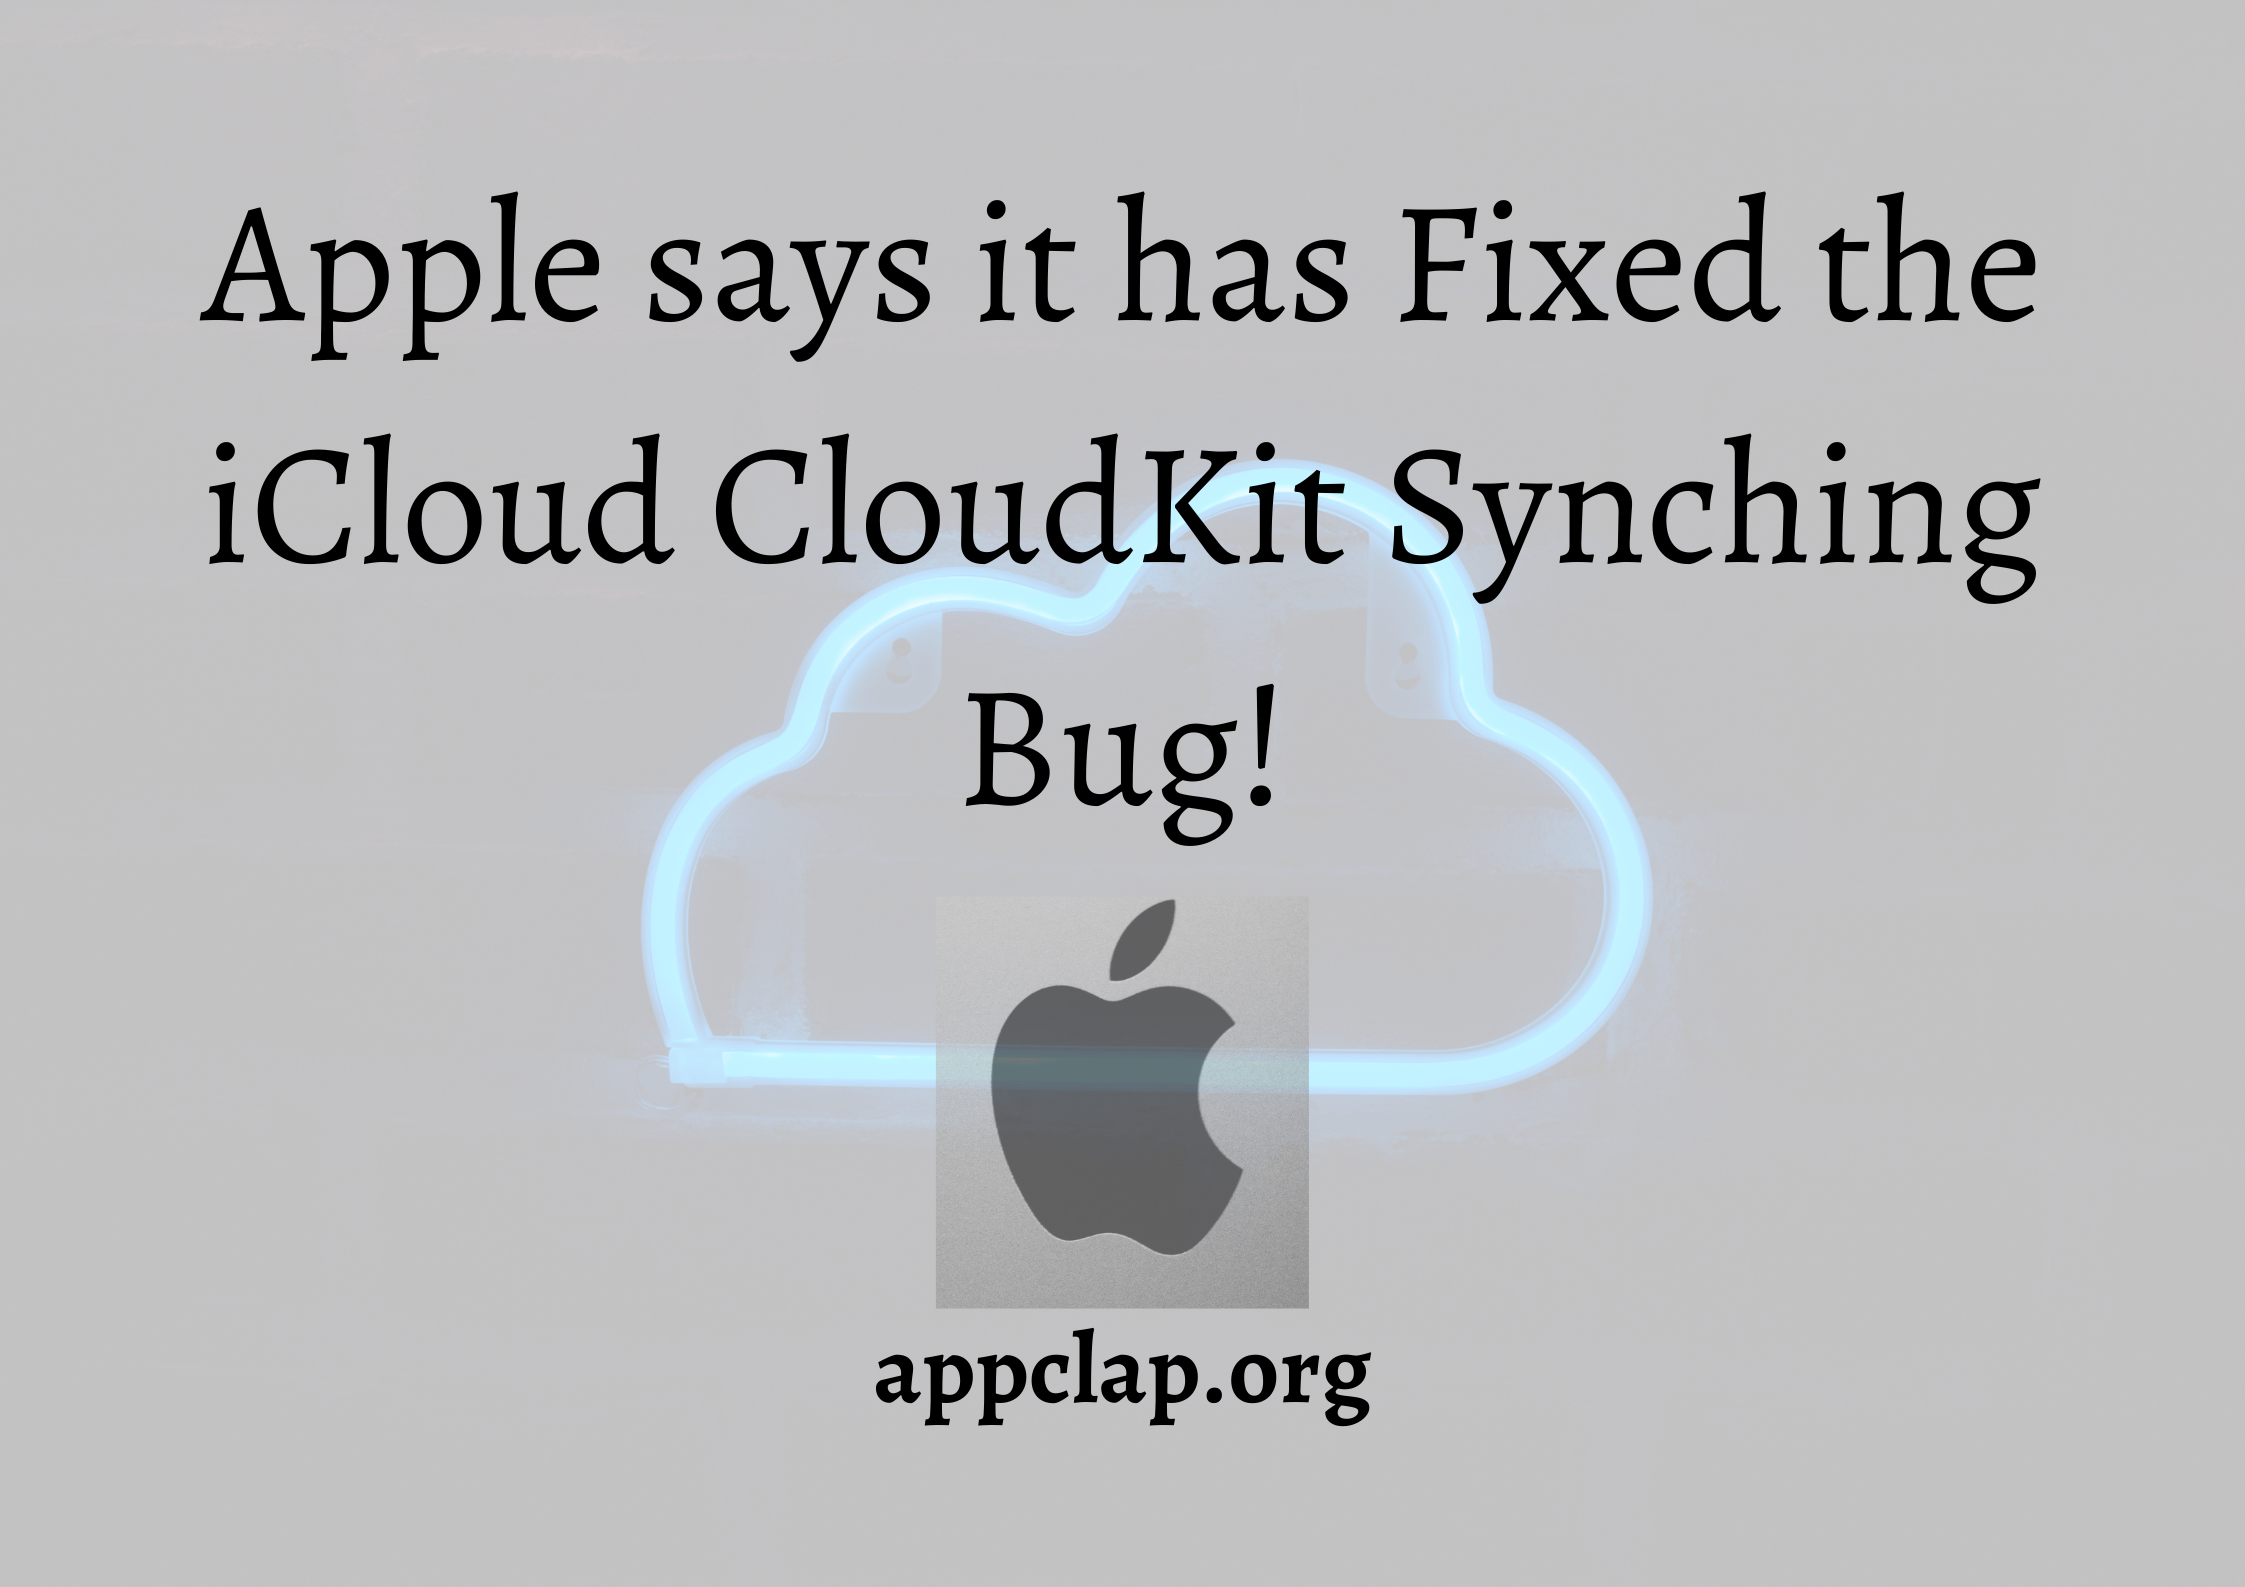 Apple says it has Fixed the iCloud CloudKit Synching Bug!